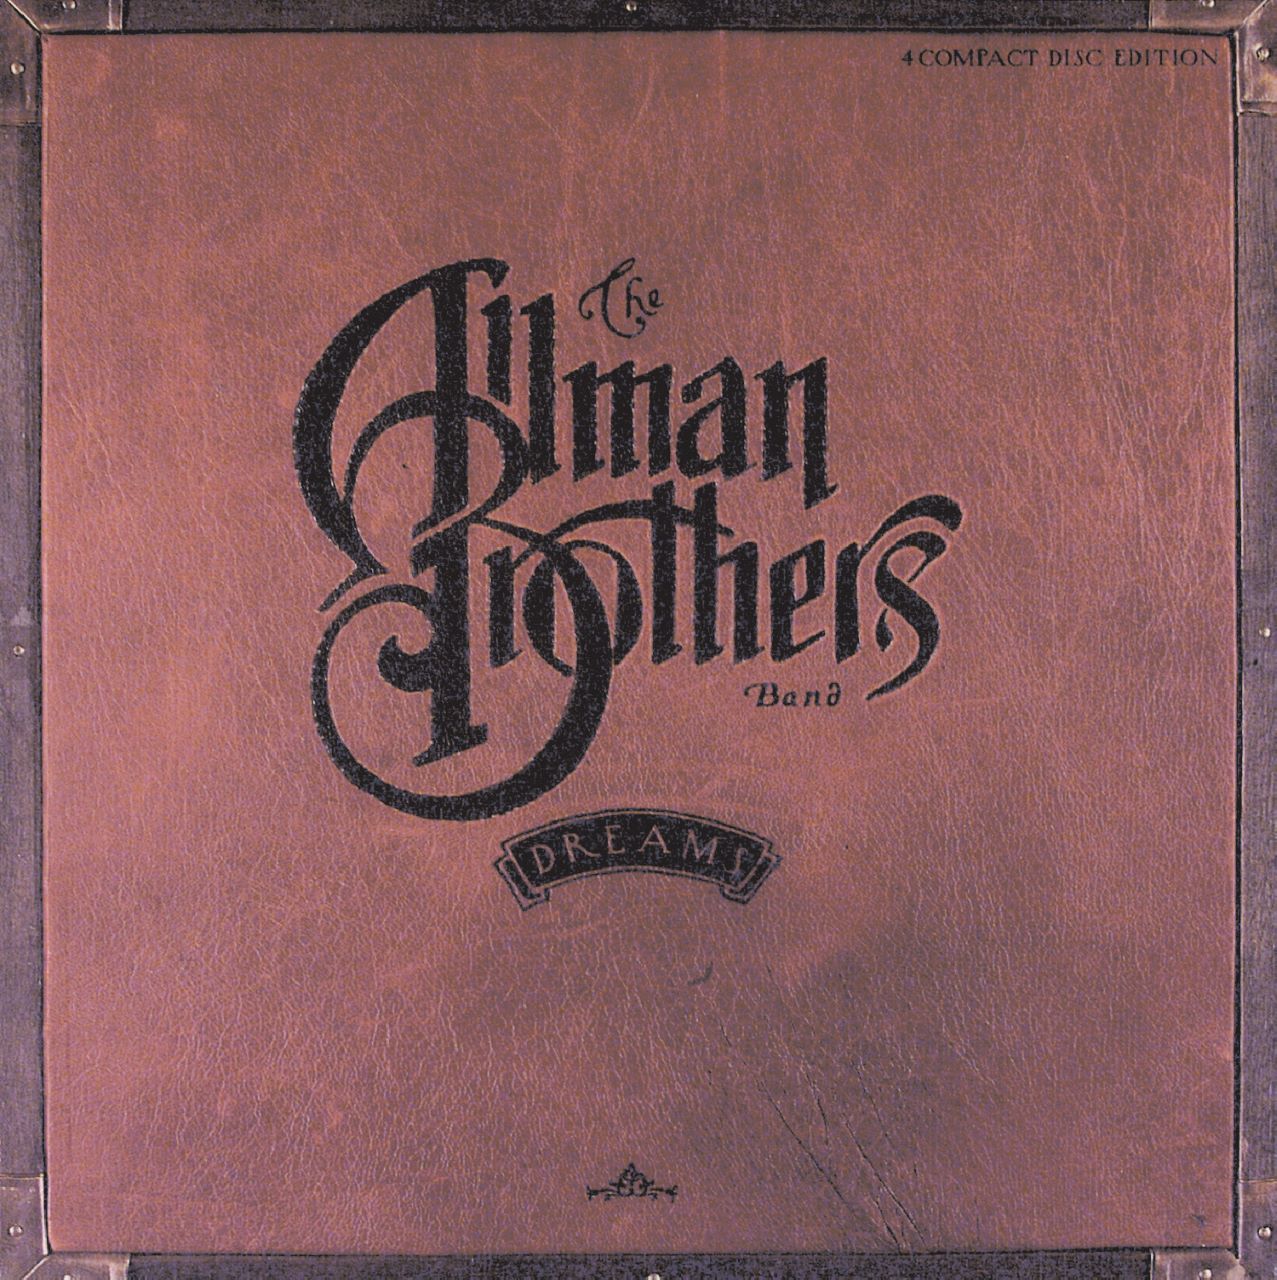 The Allman Brothers Band – Dreams cover album